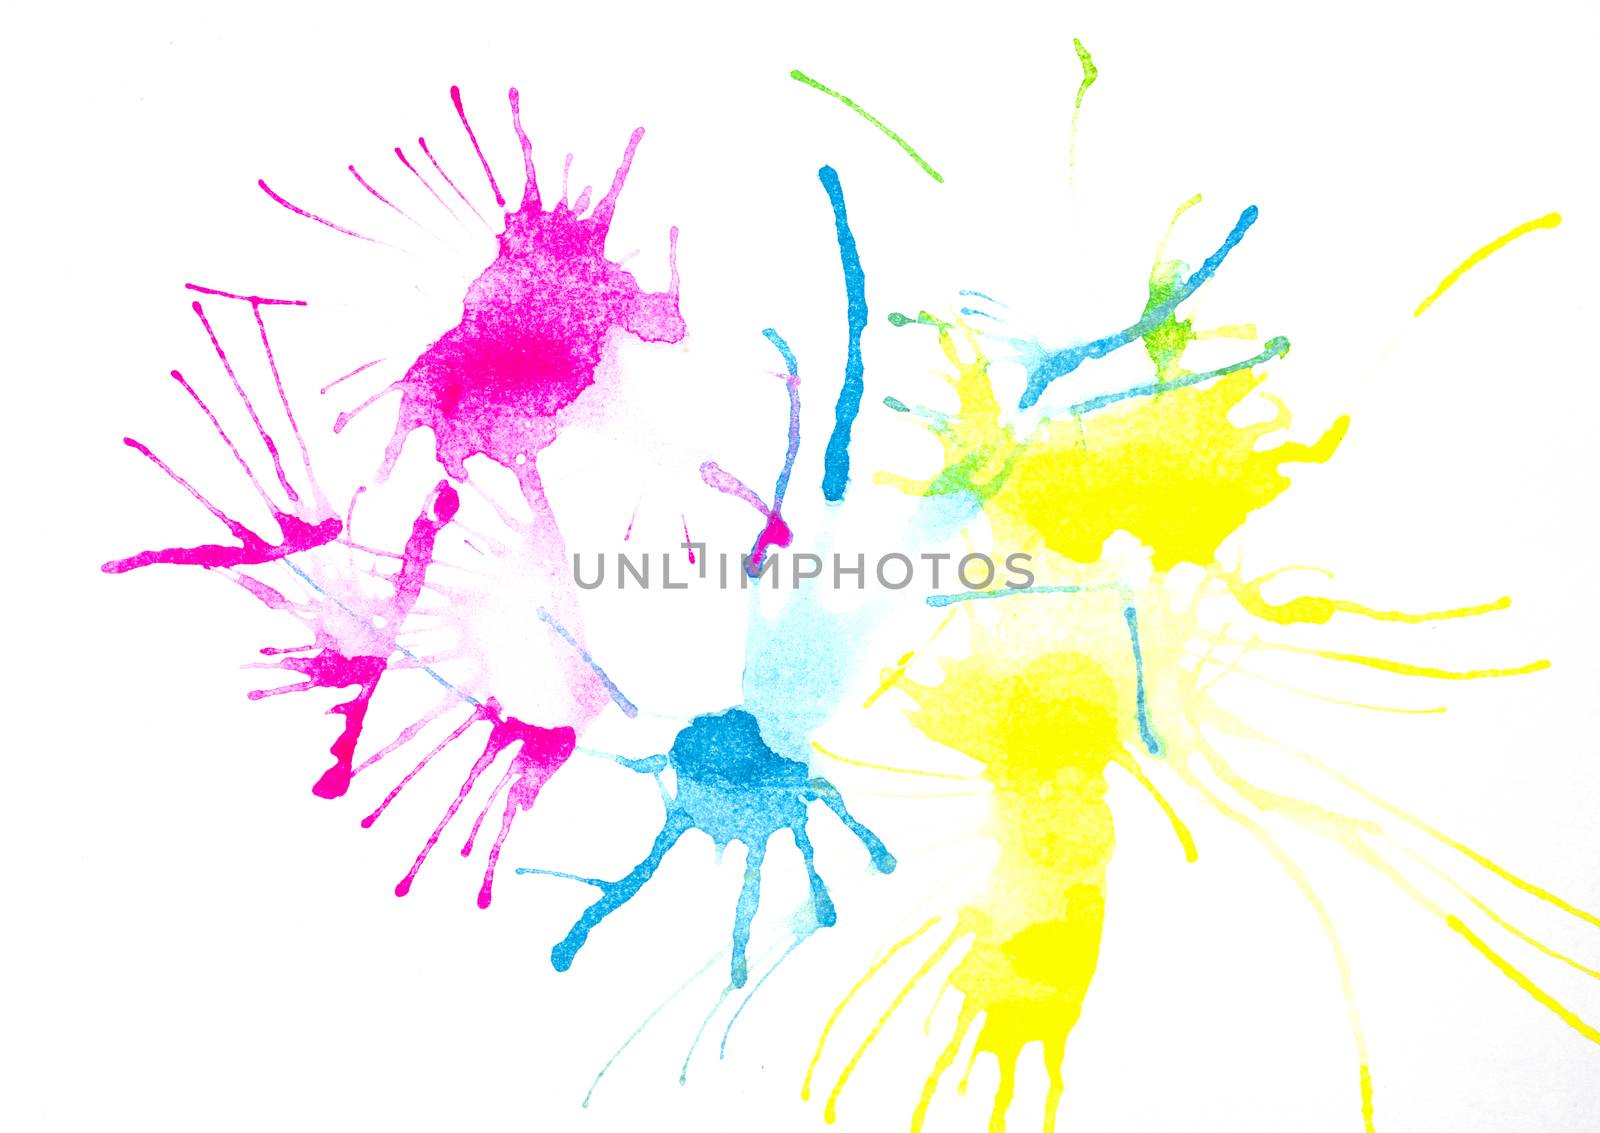 Colorful abstract watercolor texture and modern creative watercolor texture background for modern design
